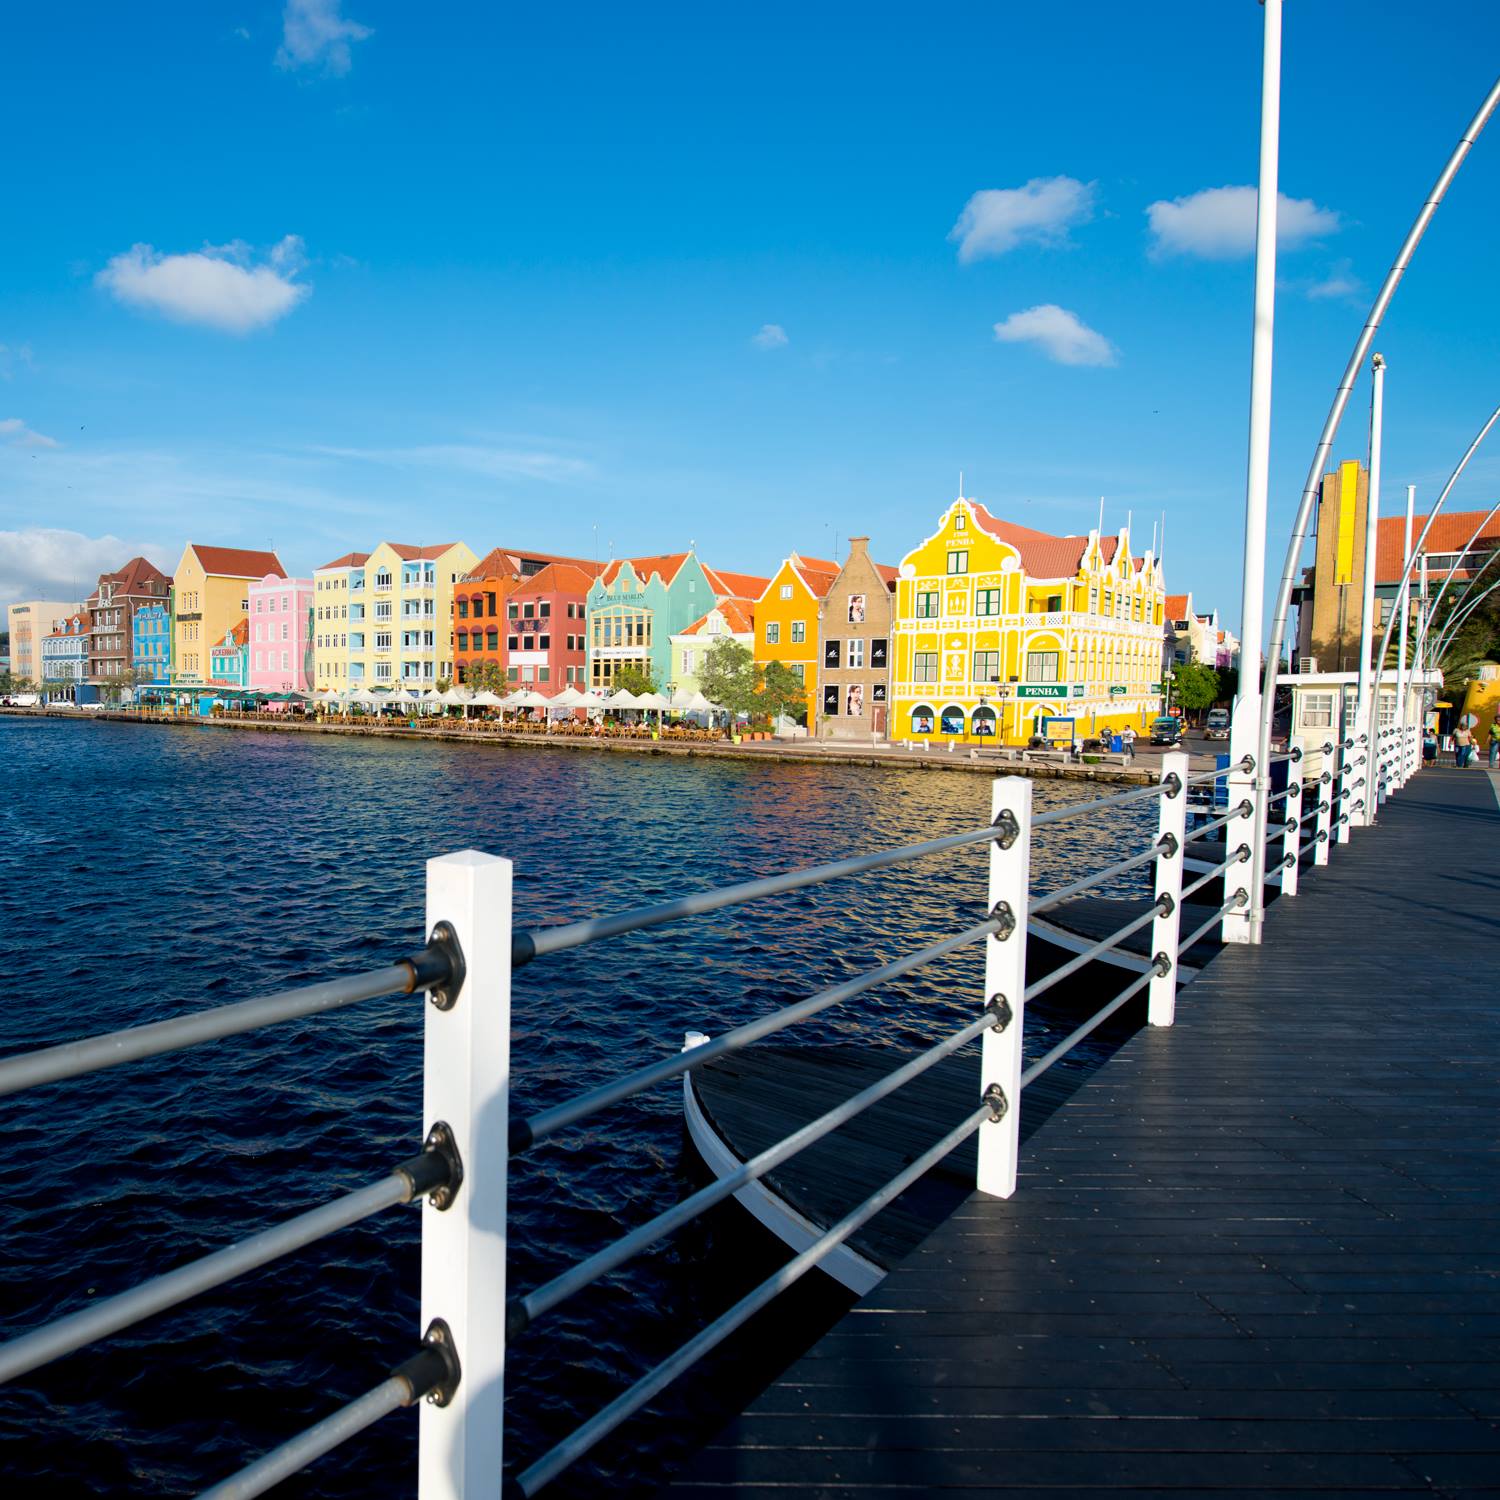 Things Curaçao Is Known For?